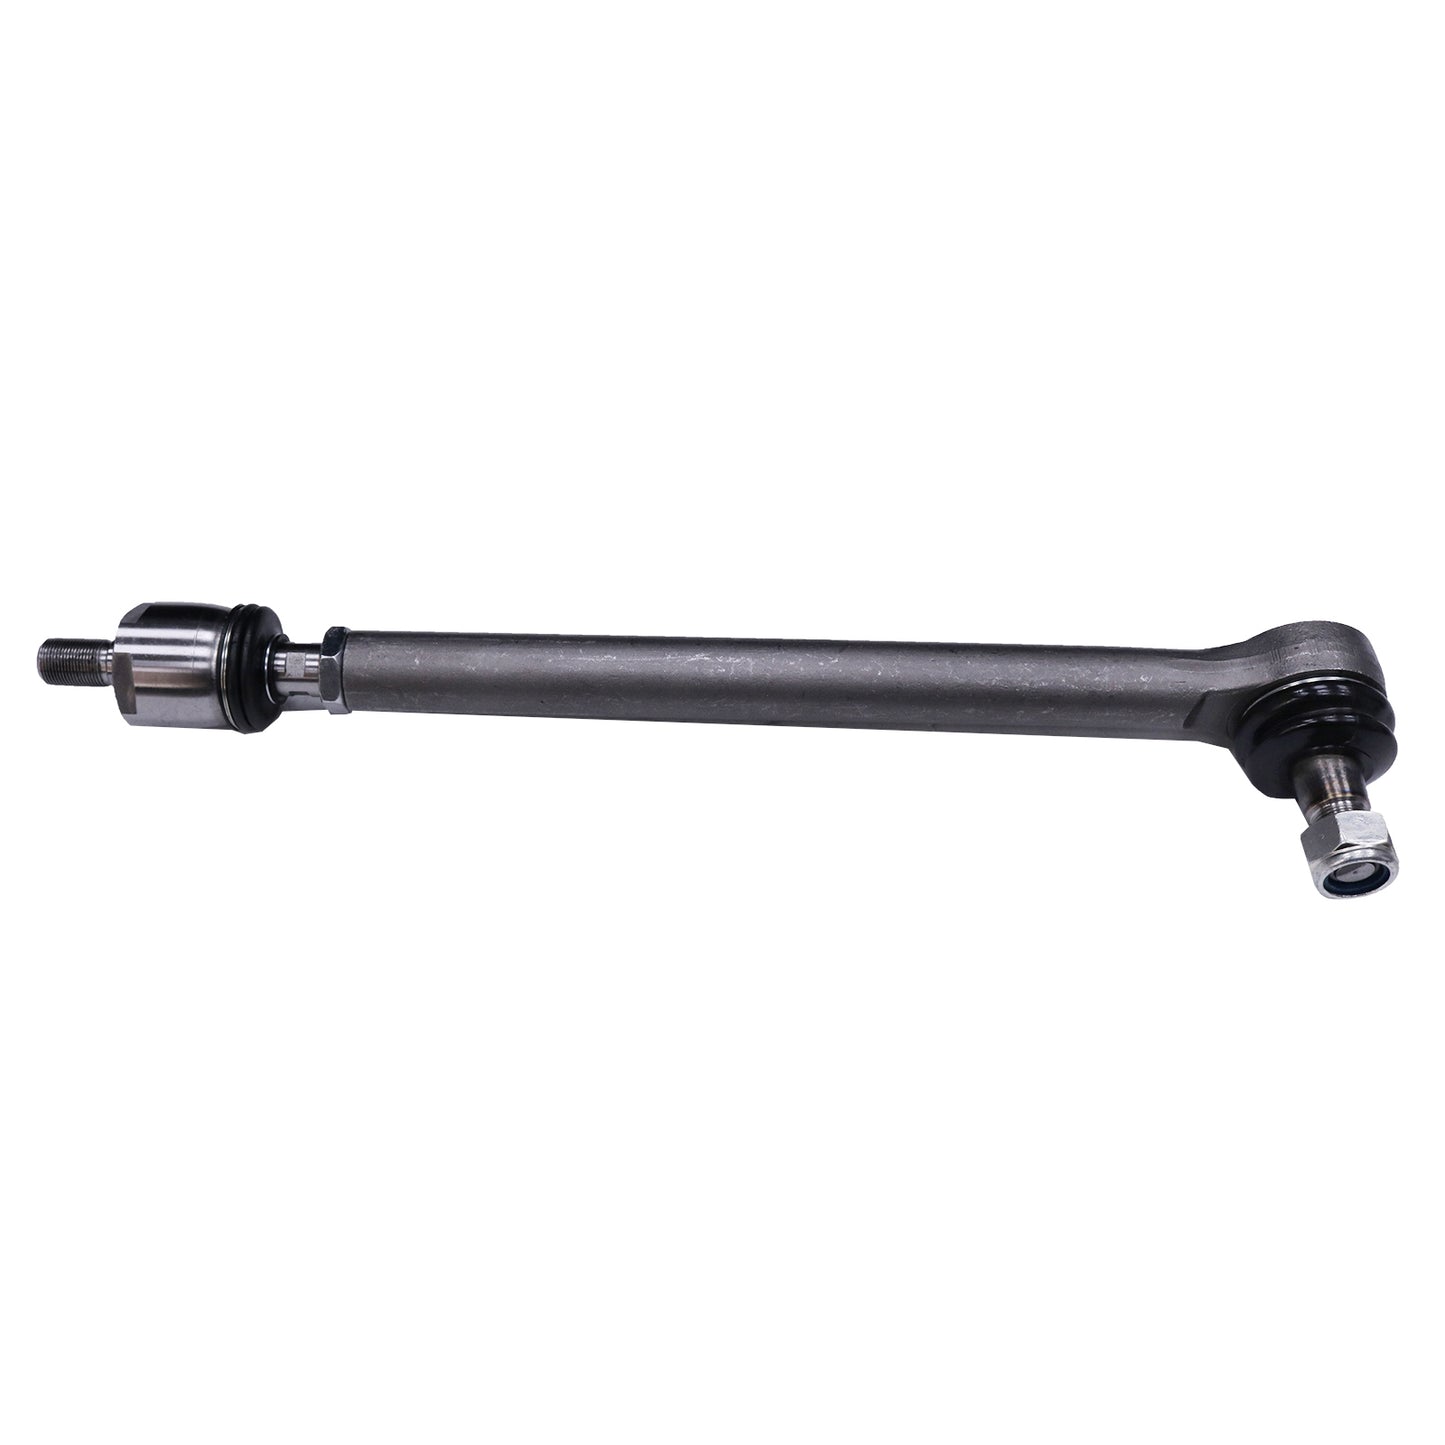 New 70046489 Articulated Tie Rod Compatible with JLG, SkyTrak, Gradall, Lull